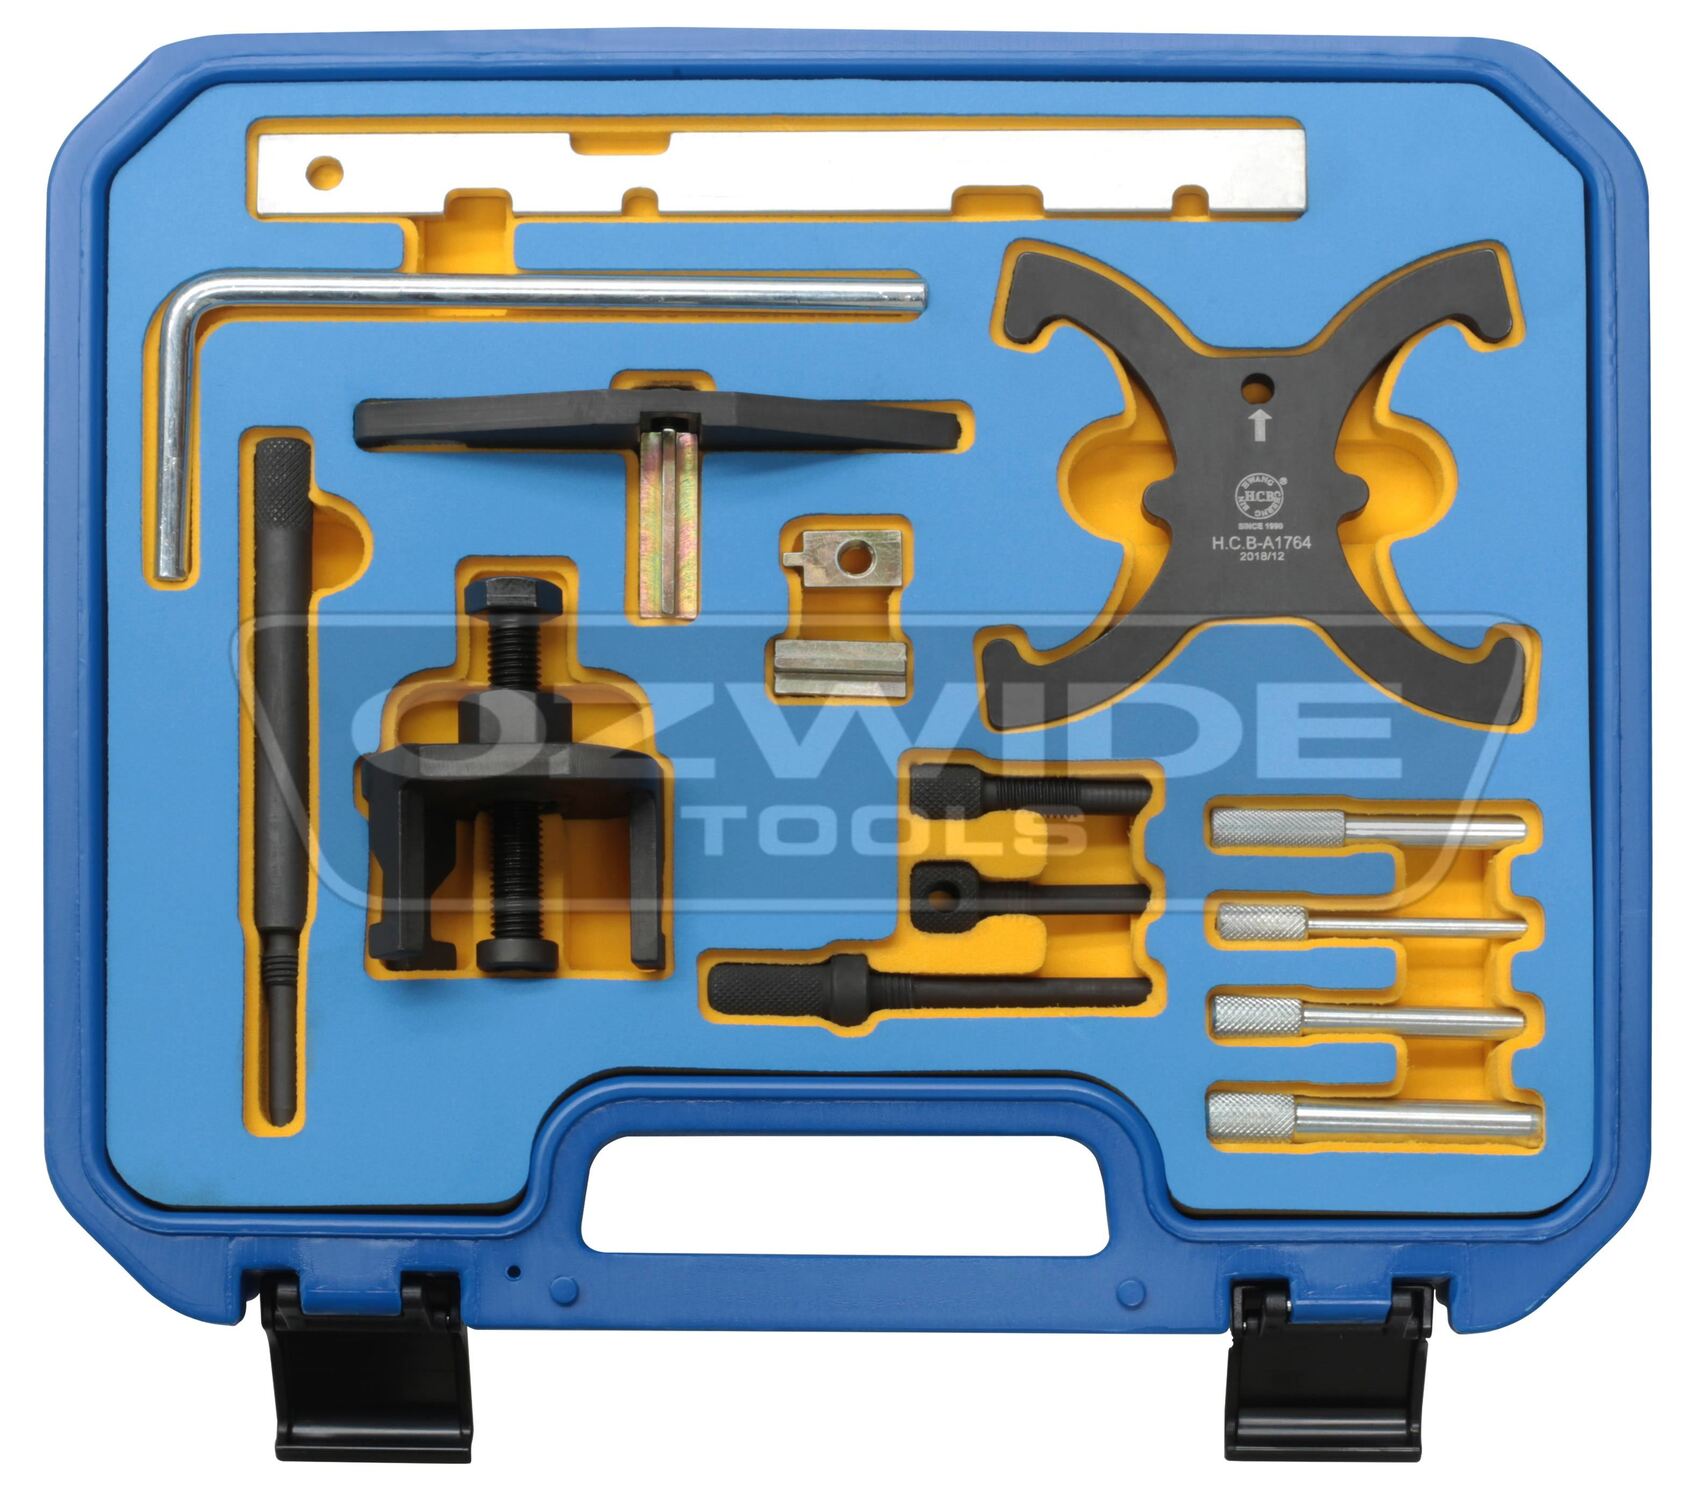 kweiny Camshaft Alignment Timing Tool Kit for Ford Engine 